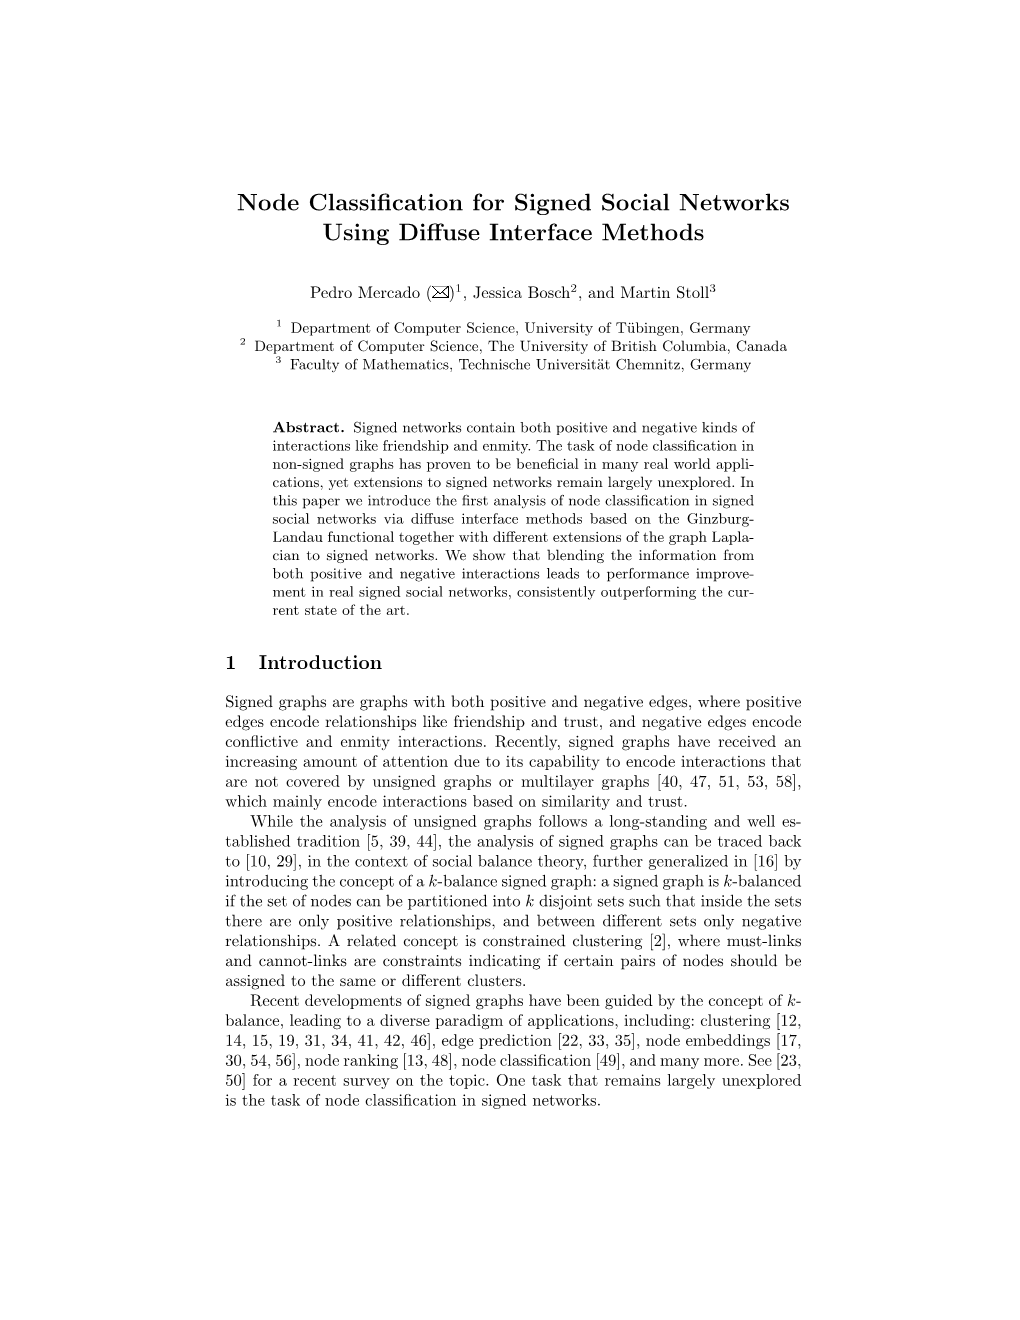 Node Classification for Signed Social Networks Using Diffuse Interface